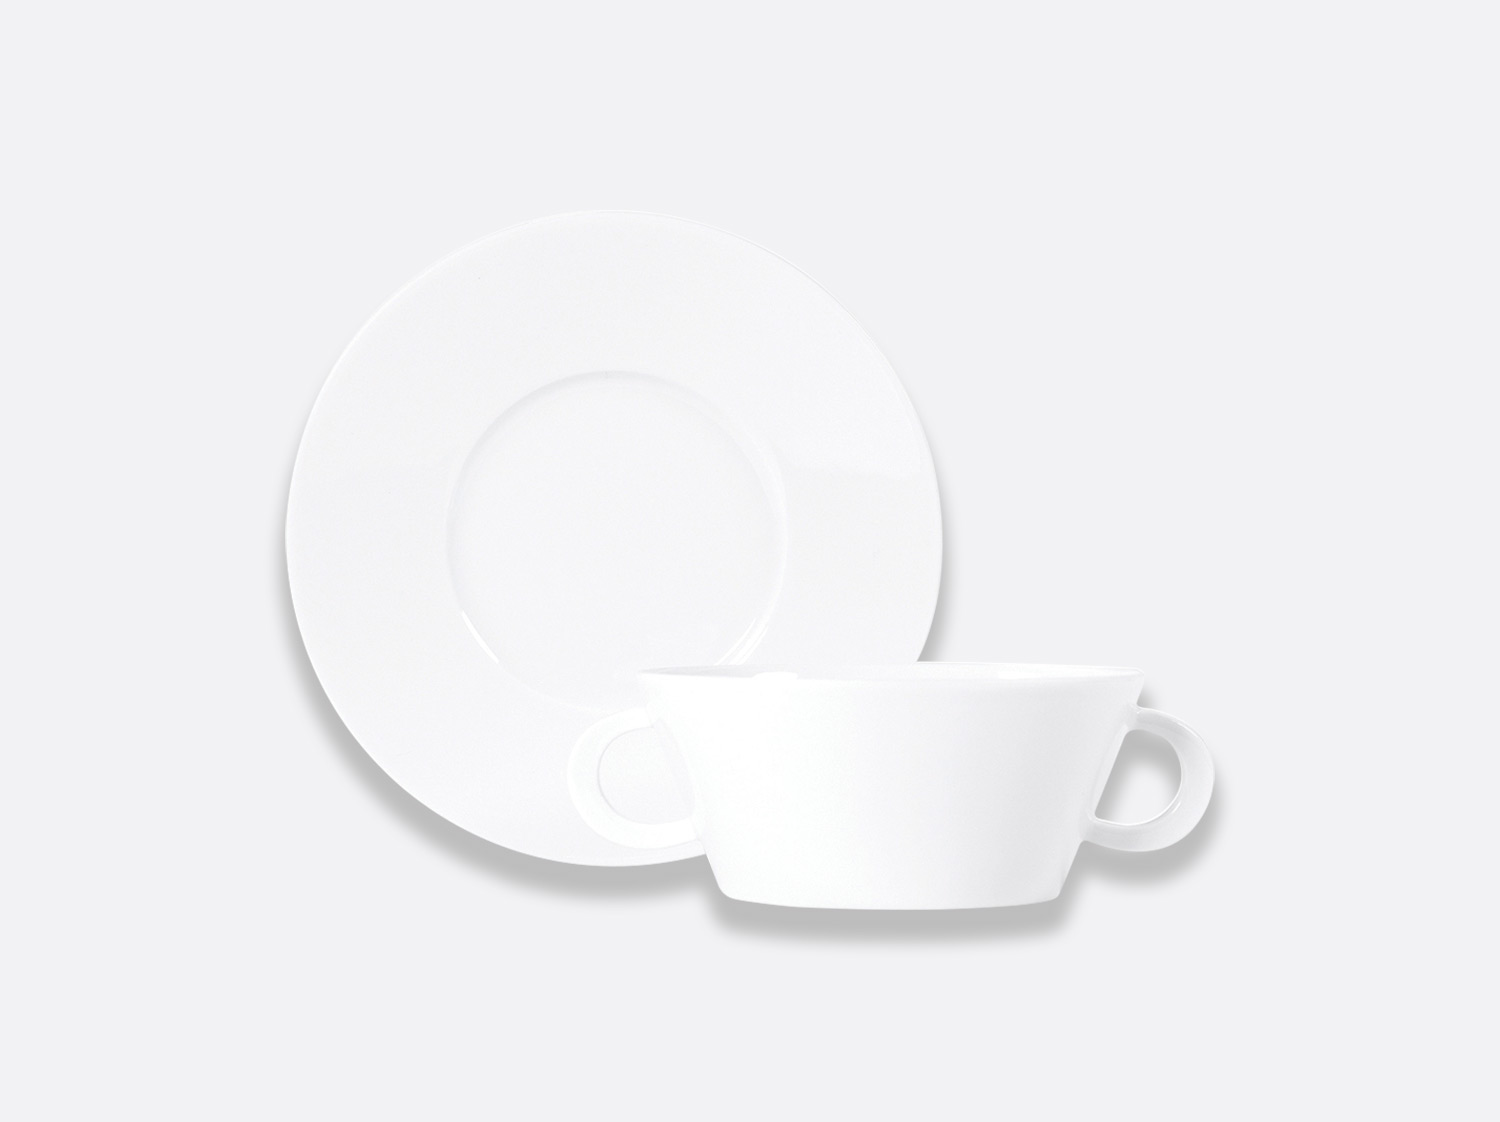 China Opus cream cup and saucer 8.5 oz of the collection Fantaisies blanches | Bernardaud